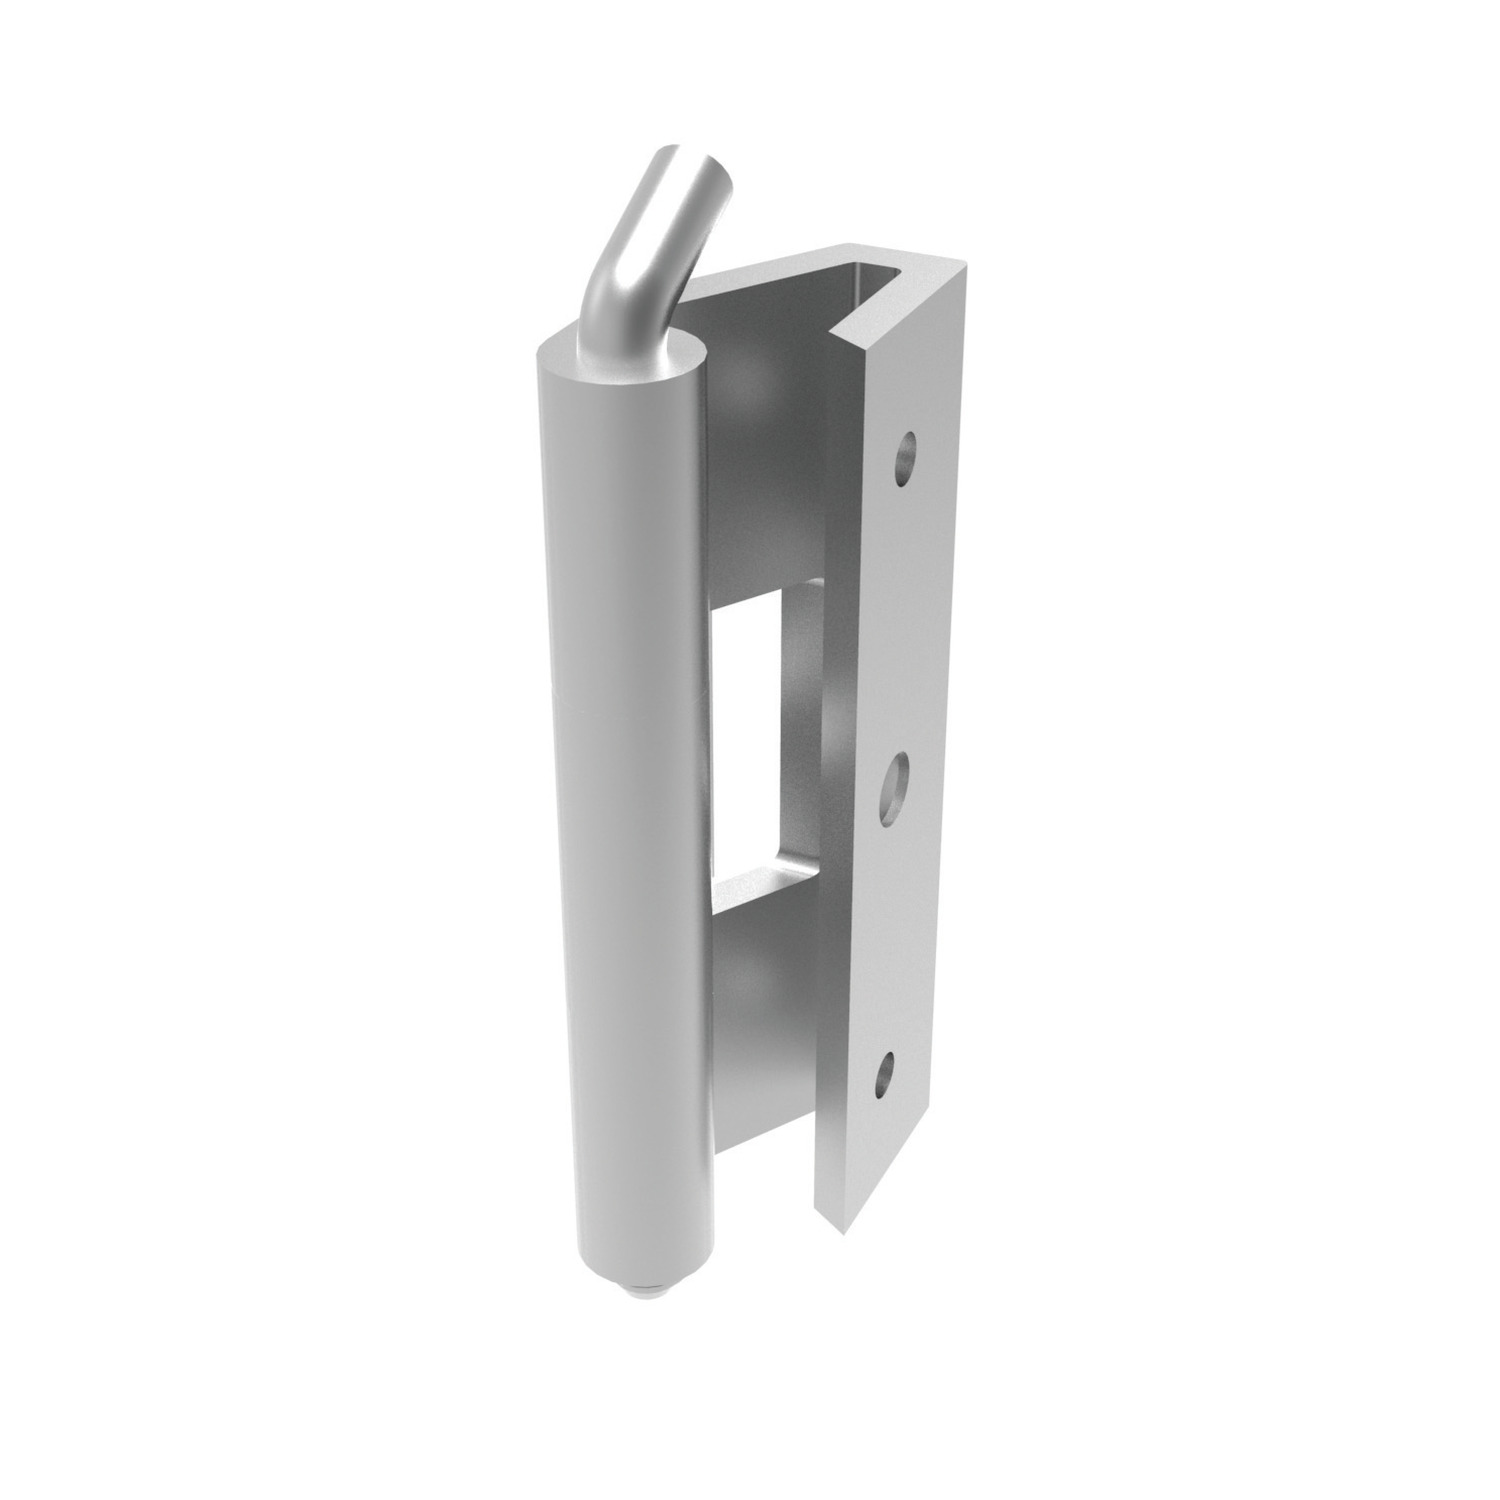 S2153 Concealed Pivot Hinges - Lift Off